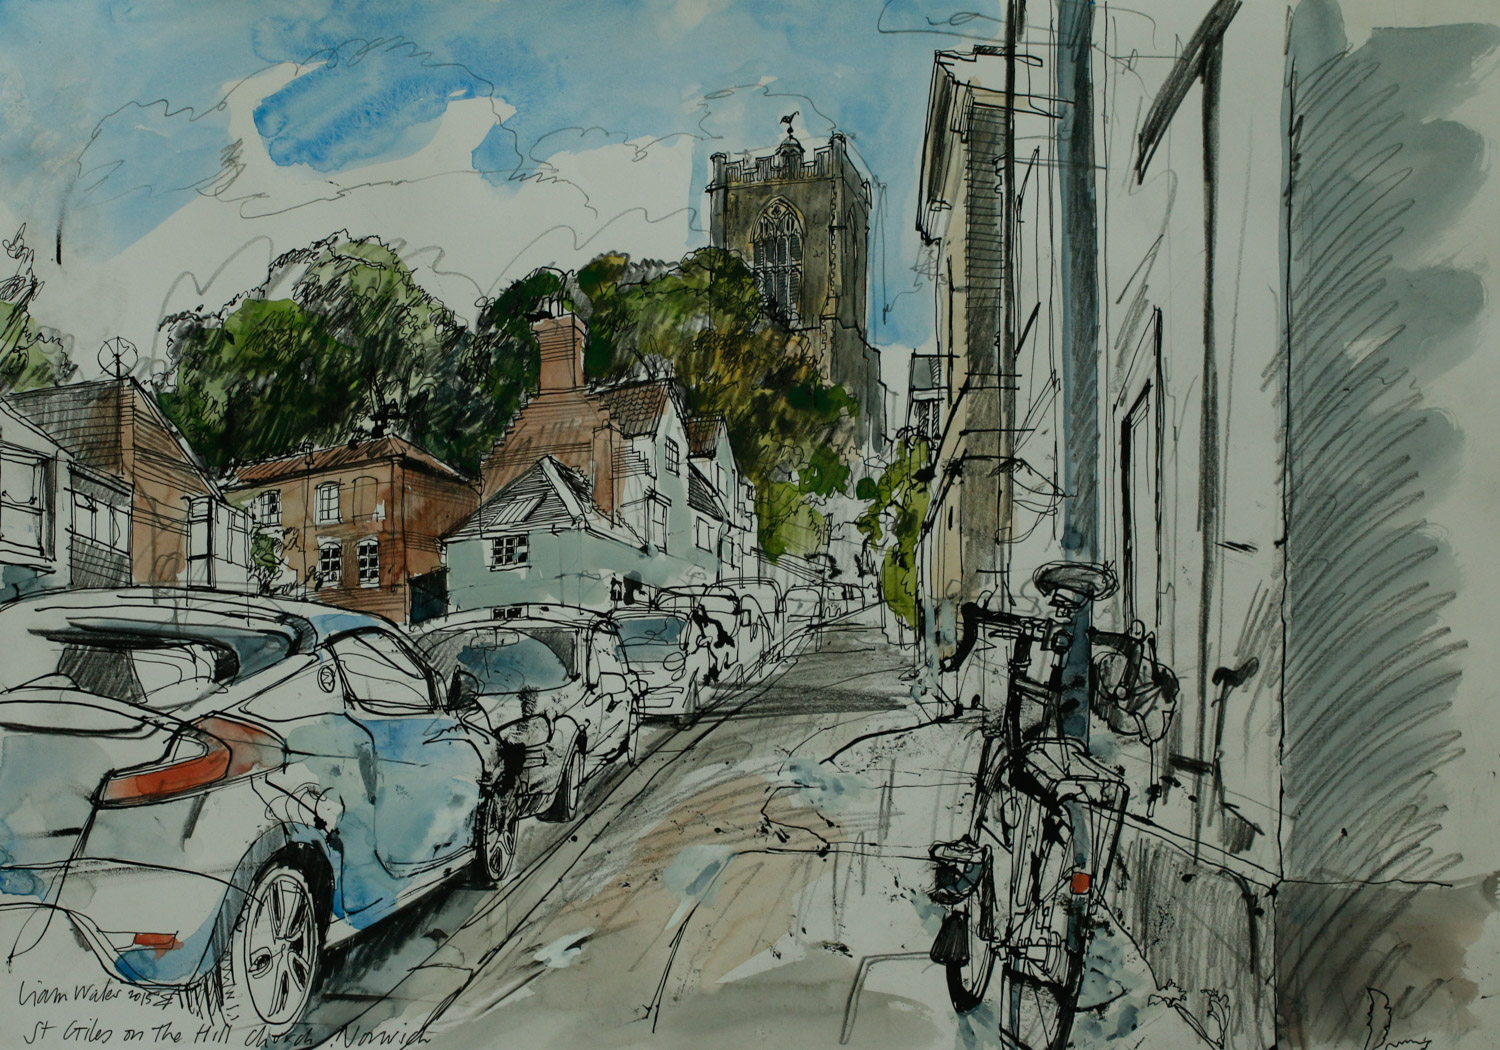 Artist Liam Wales - St Giles on the Hill 16x24 Ink, Watercolour & Charcoal on Paper at Paint Out Norwich 2015